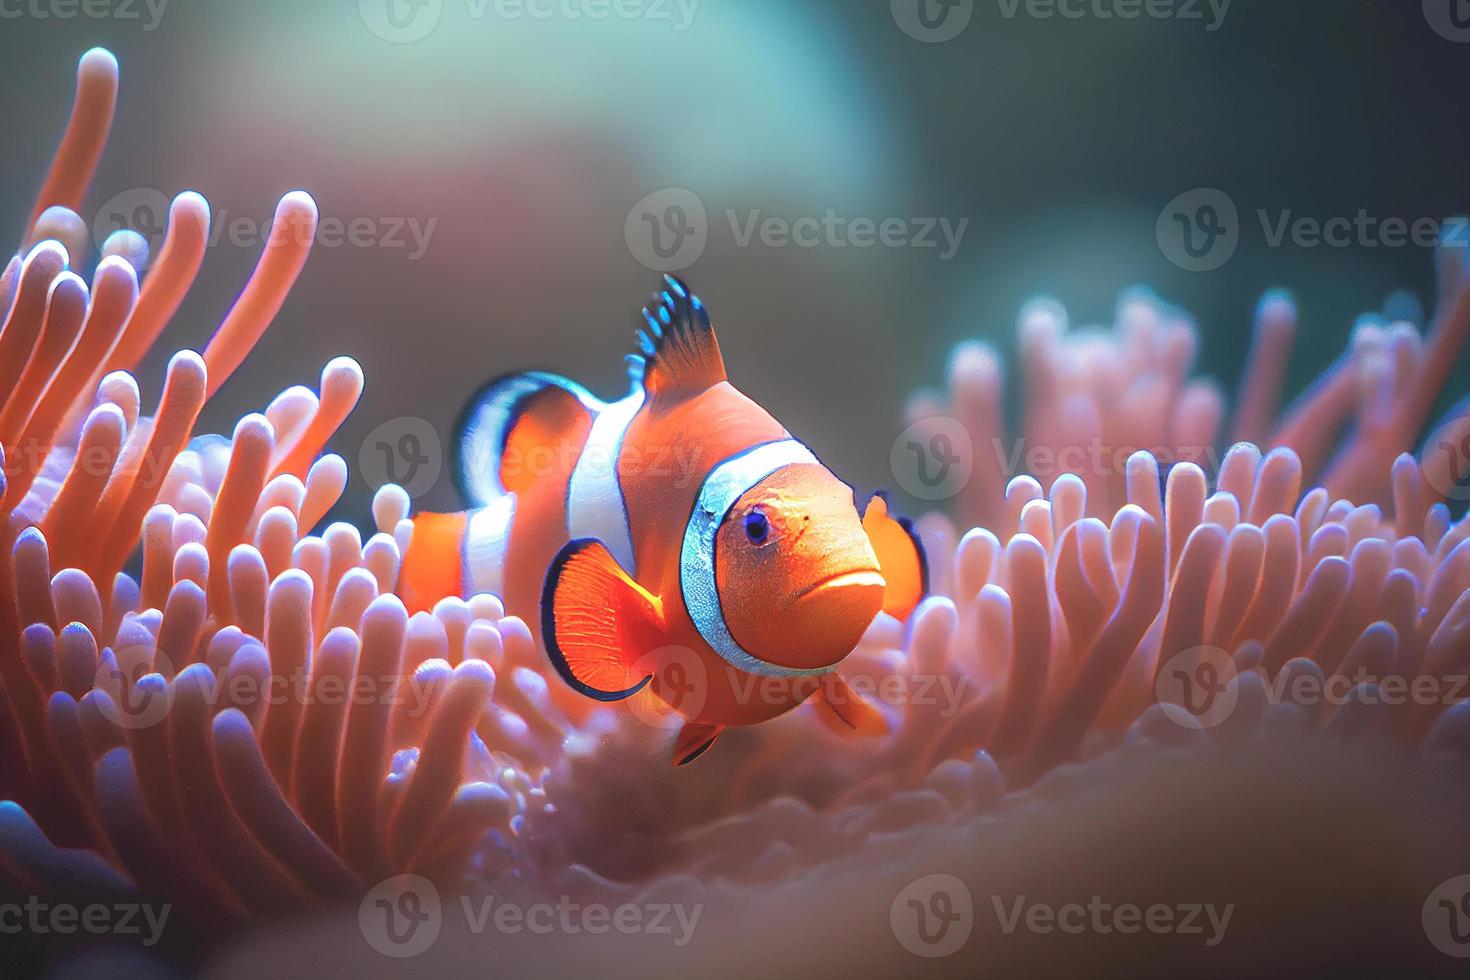 Close up of a brightly colored Clown fish swimming among the coral in aquarium tank. photo